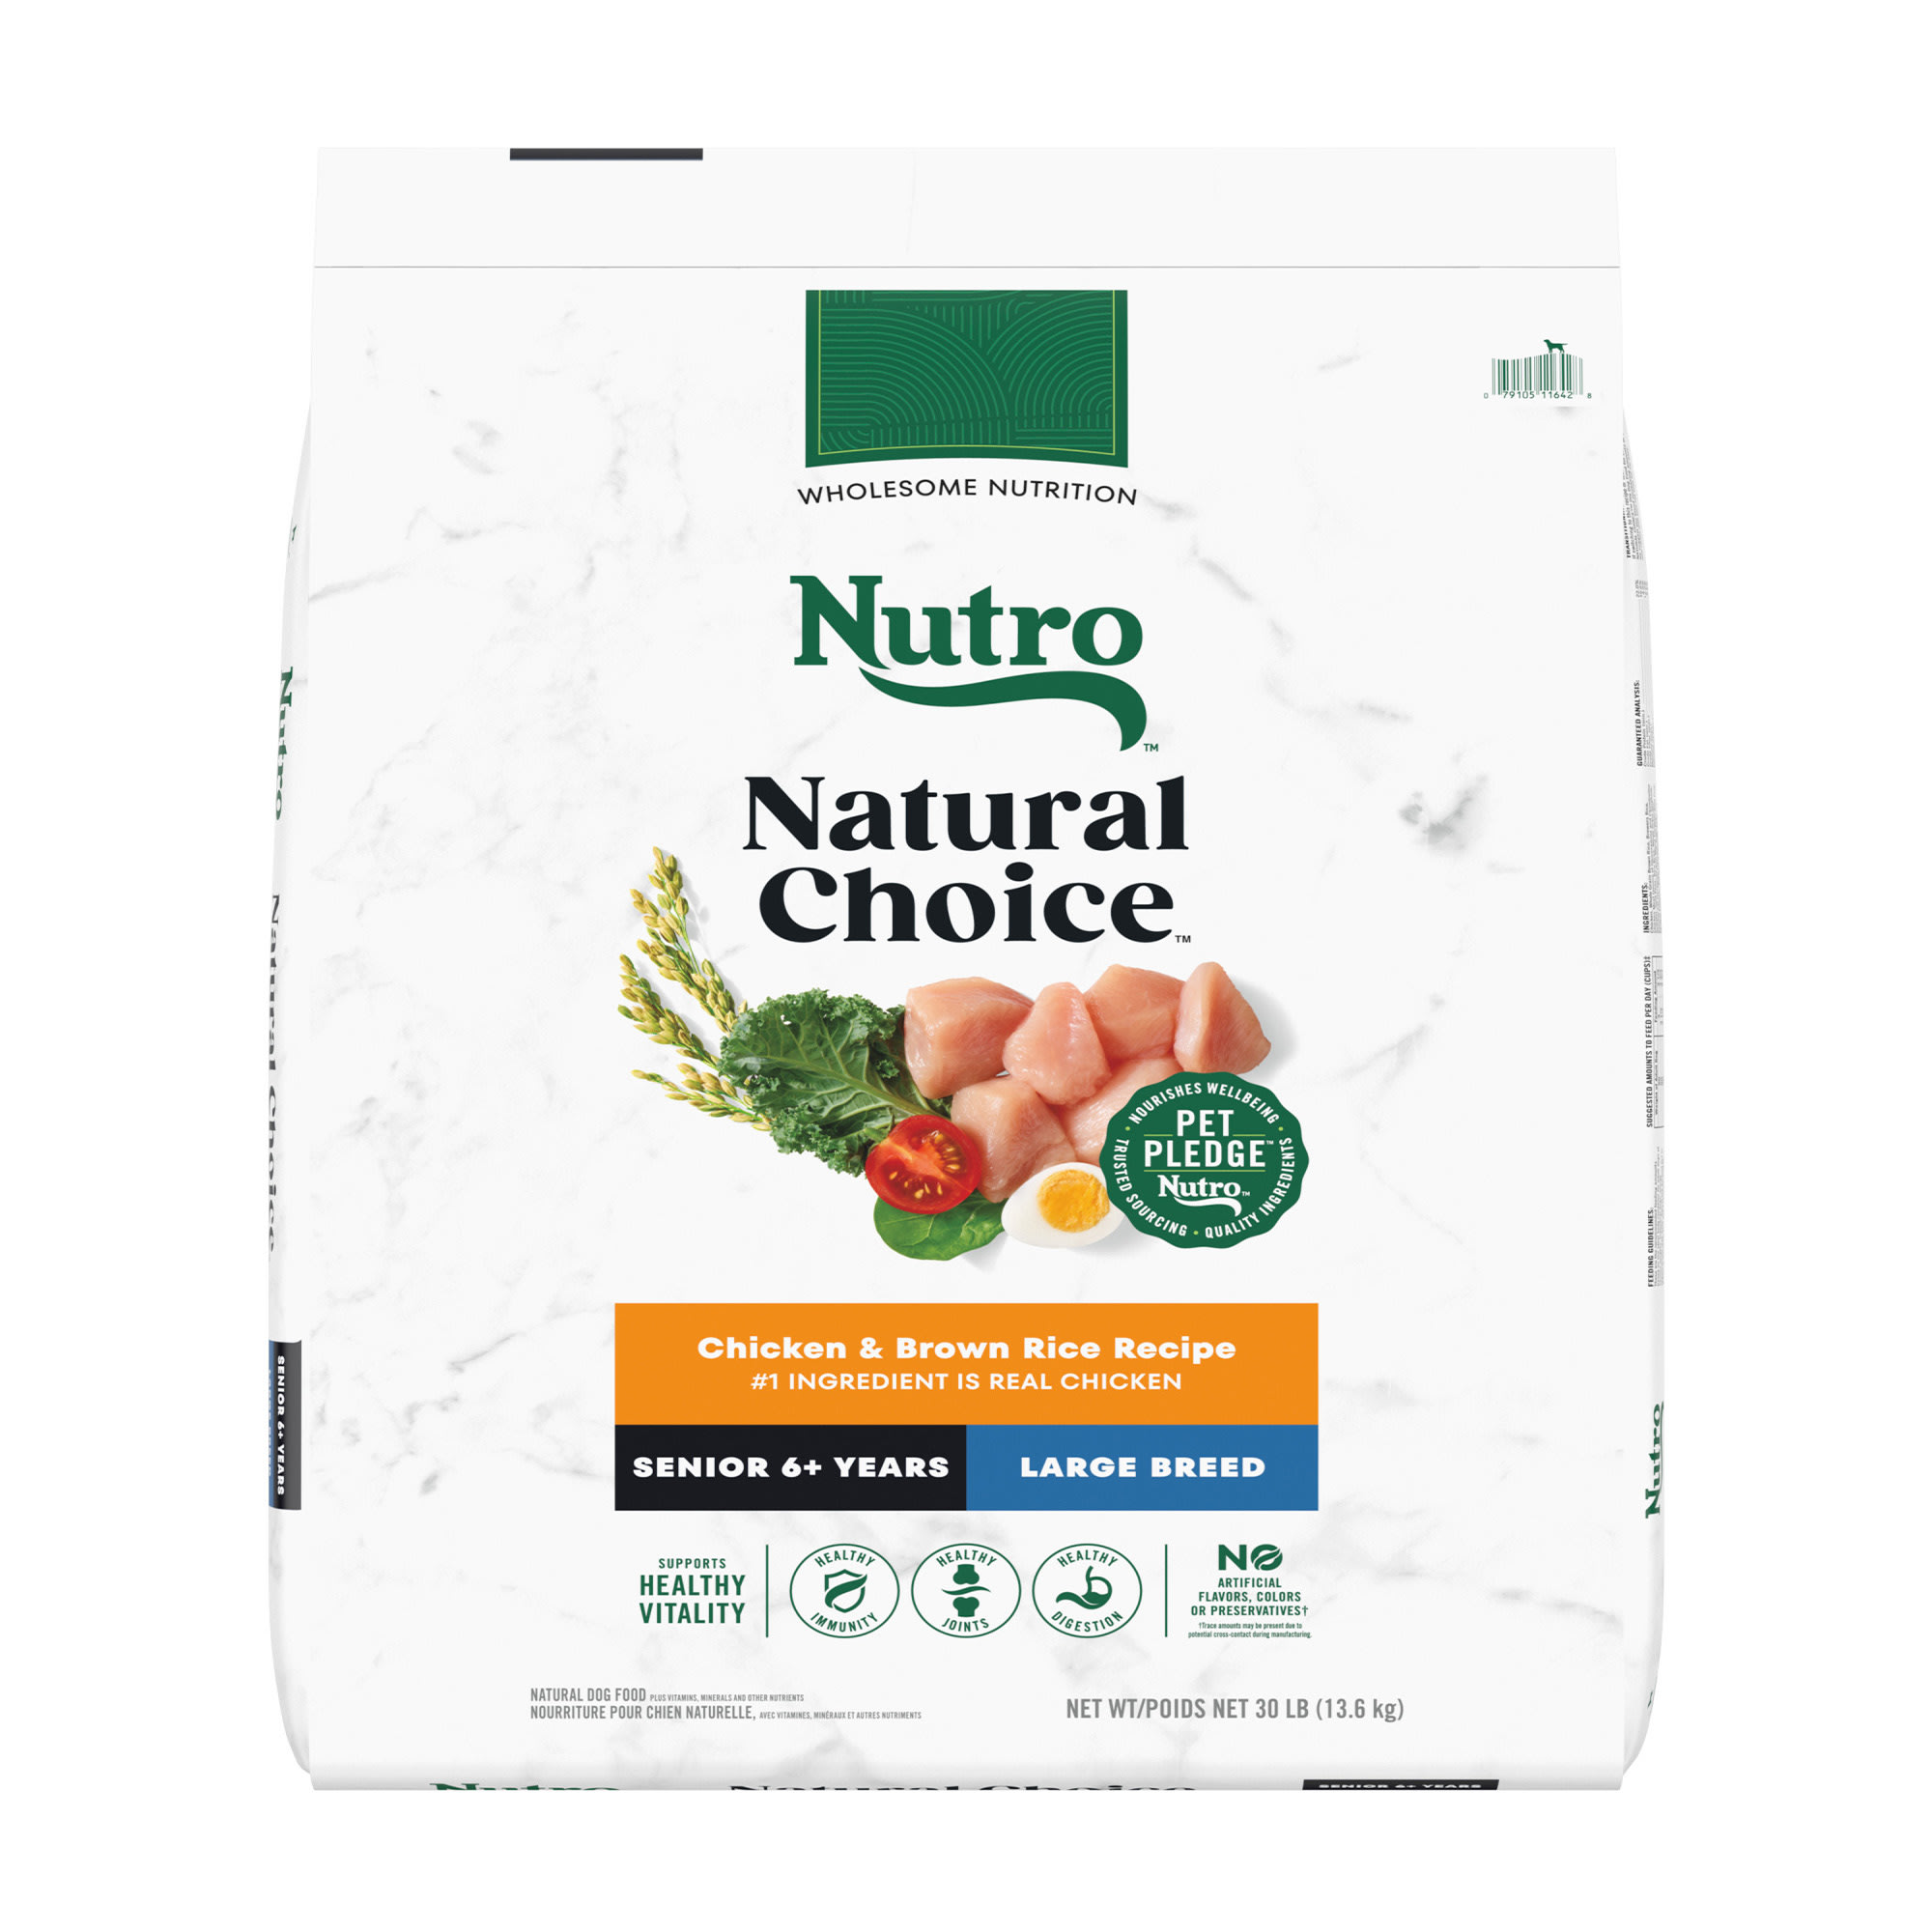 Nutro Natural Choice Chicken & Brown Rice Recipe Large Breed Senior Dry Dog Food